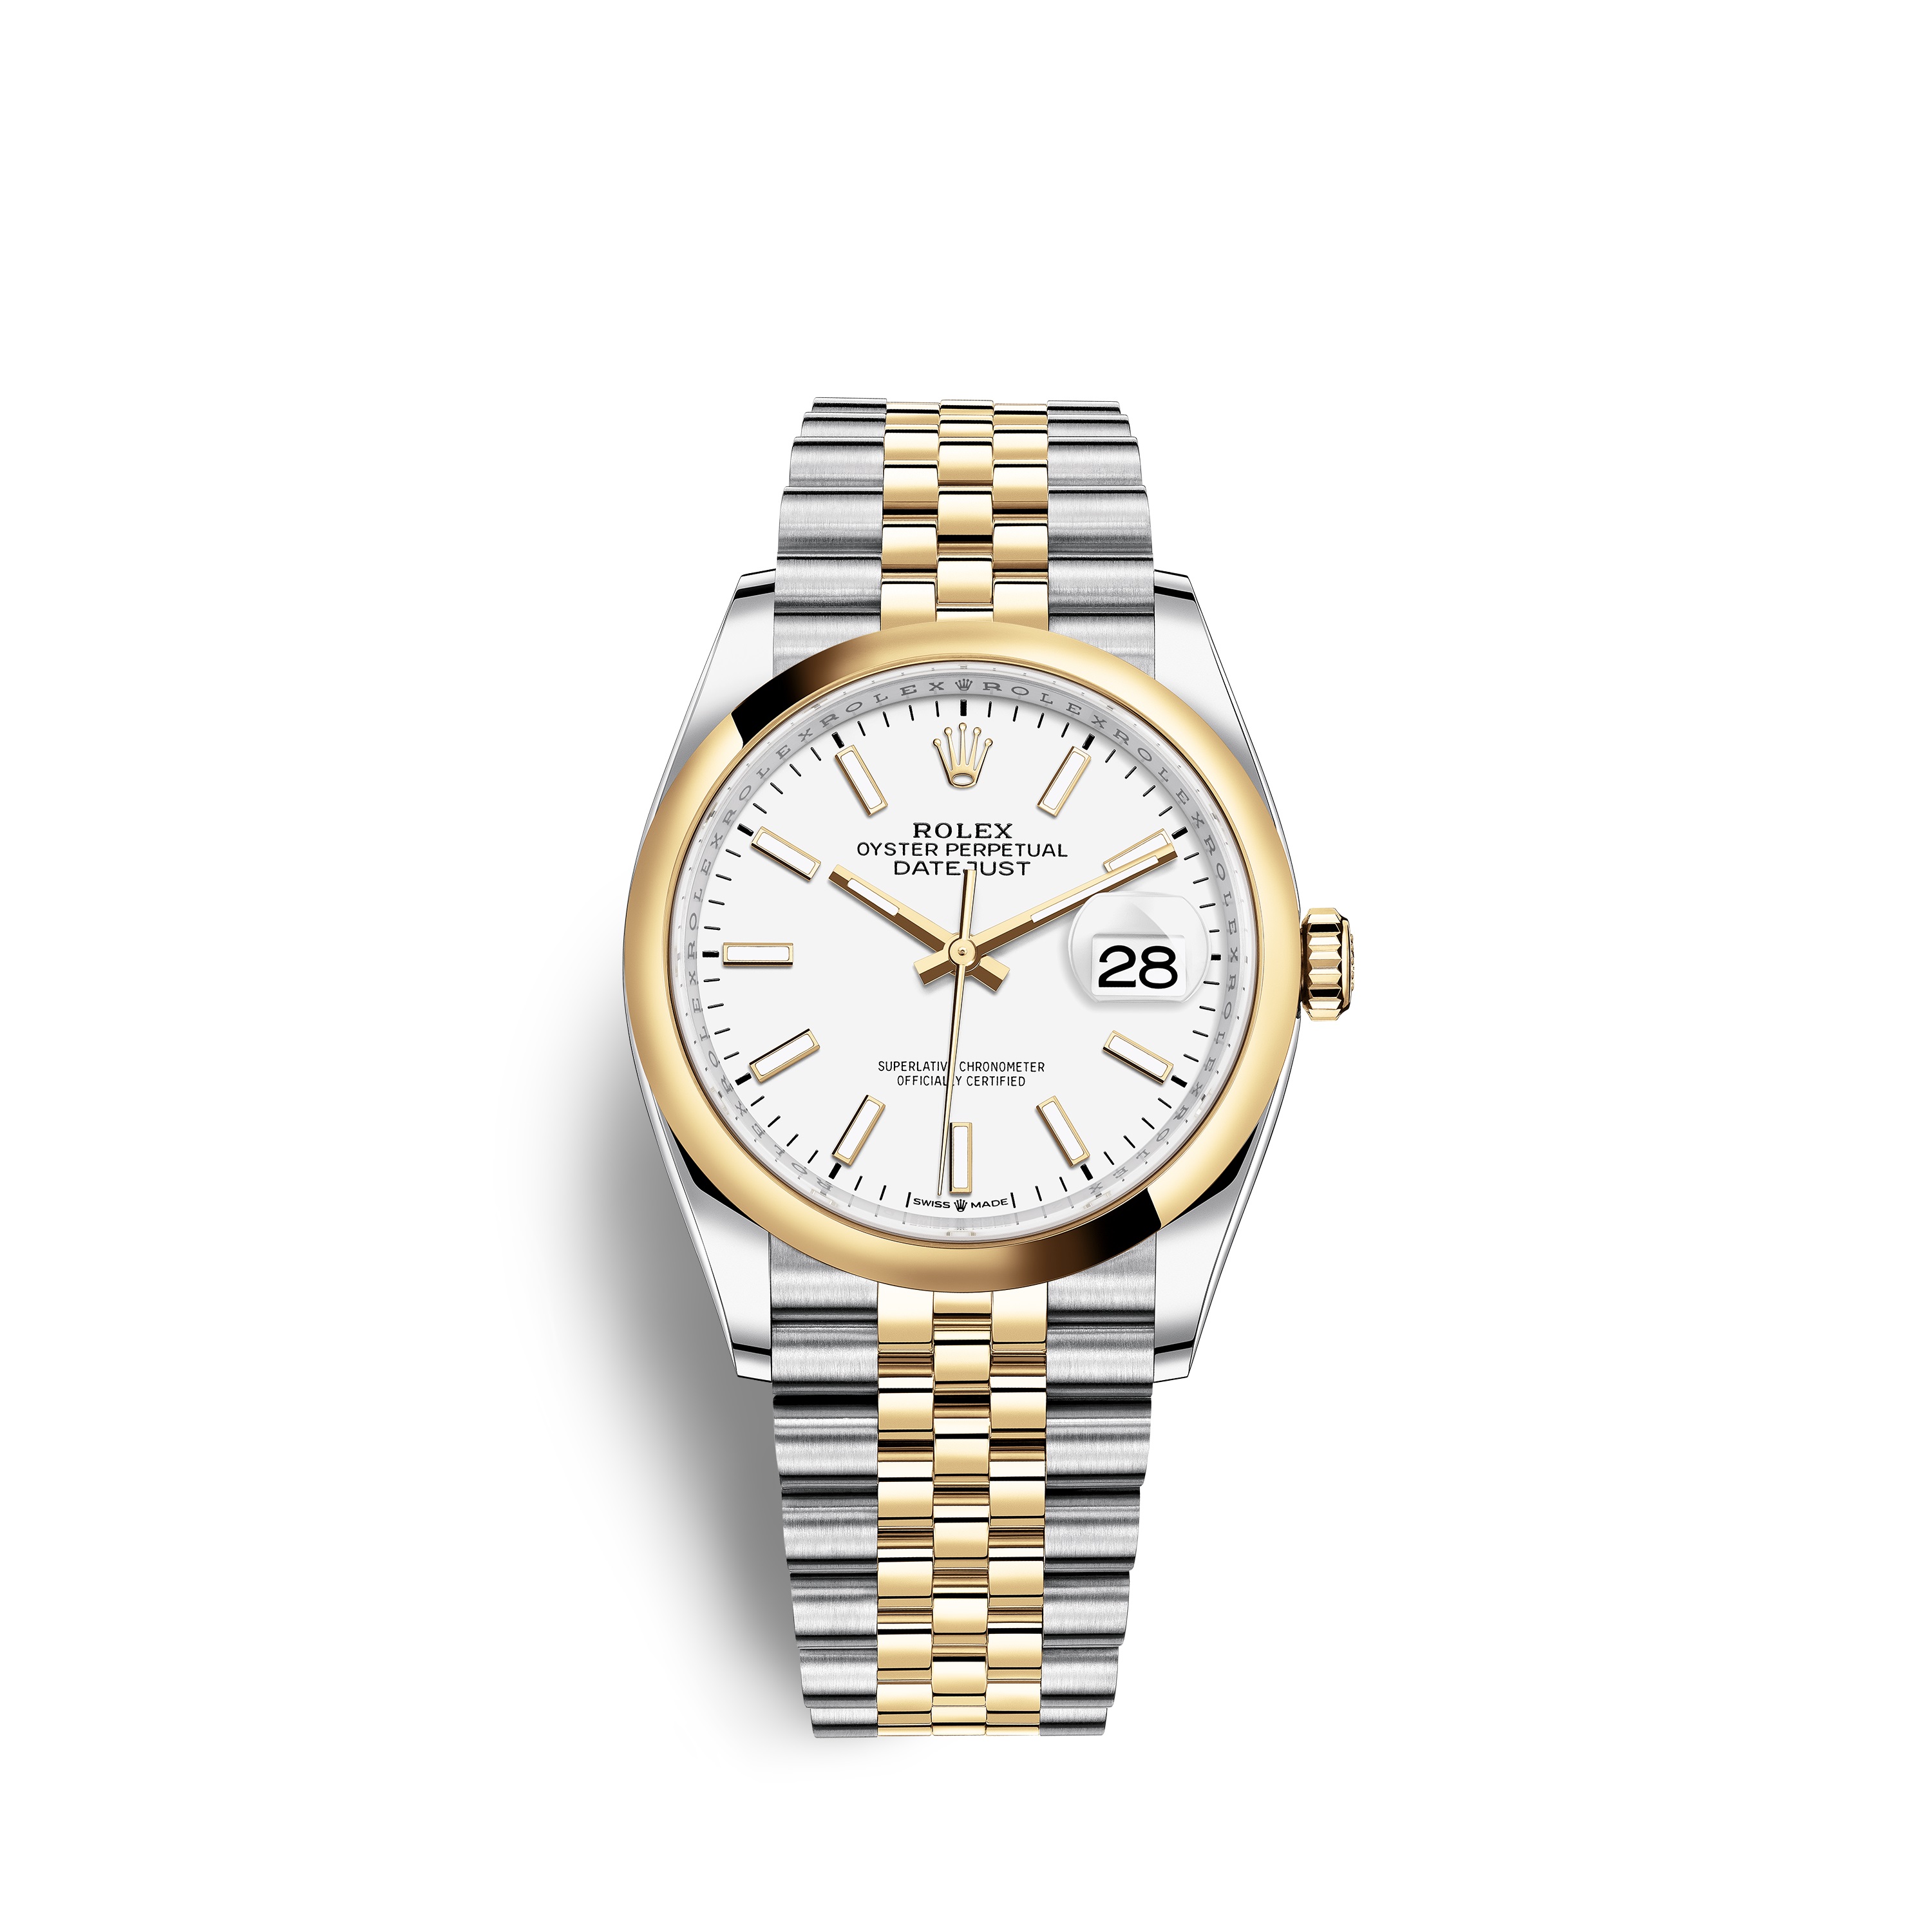 Datejust 36 126203 Gold & Stainless Steel Watch (White)